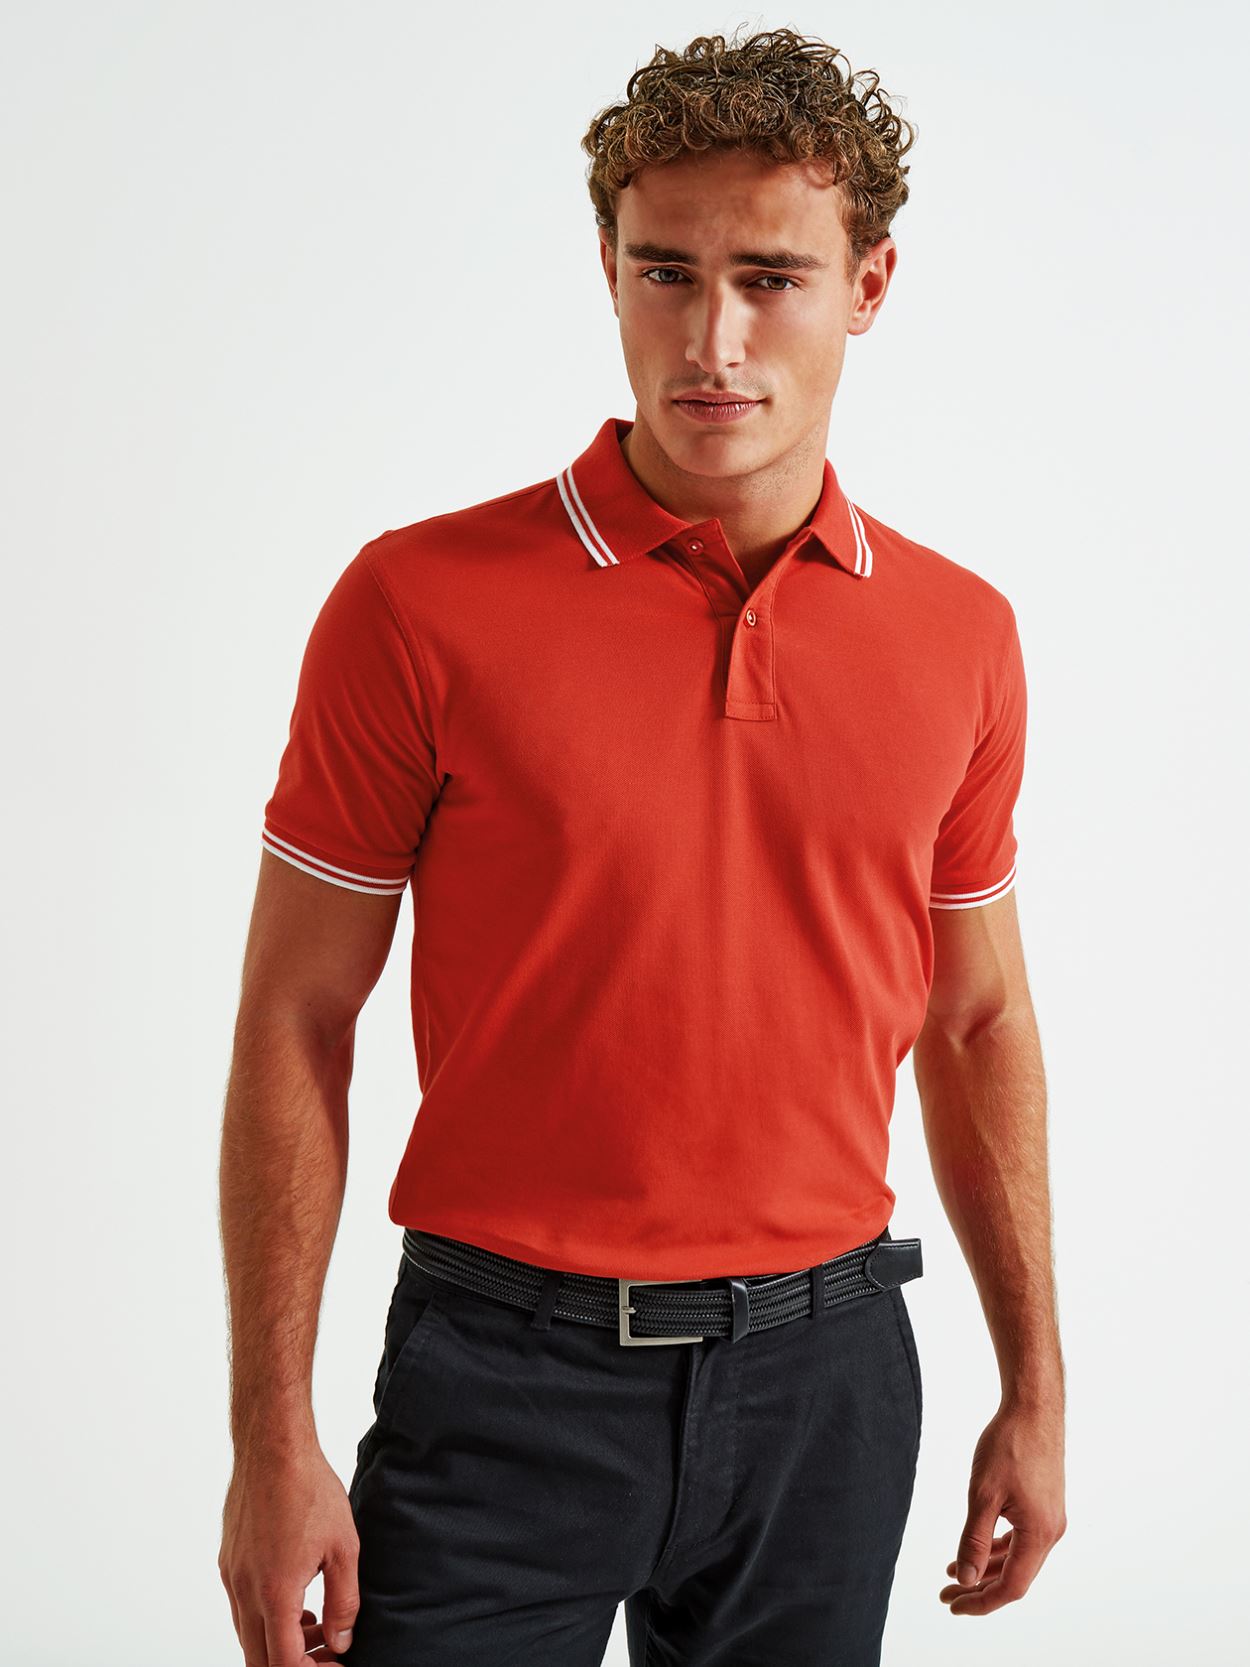 AQ011 Mens Classic Fit Tipped Polo Image 2